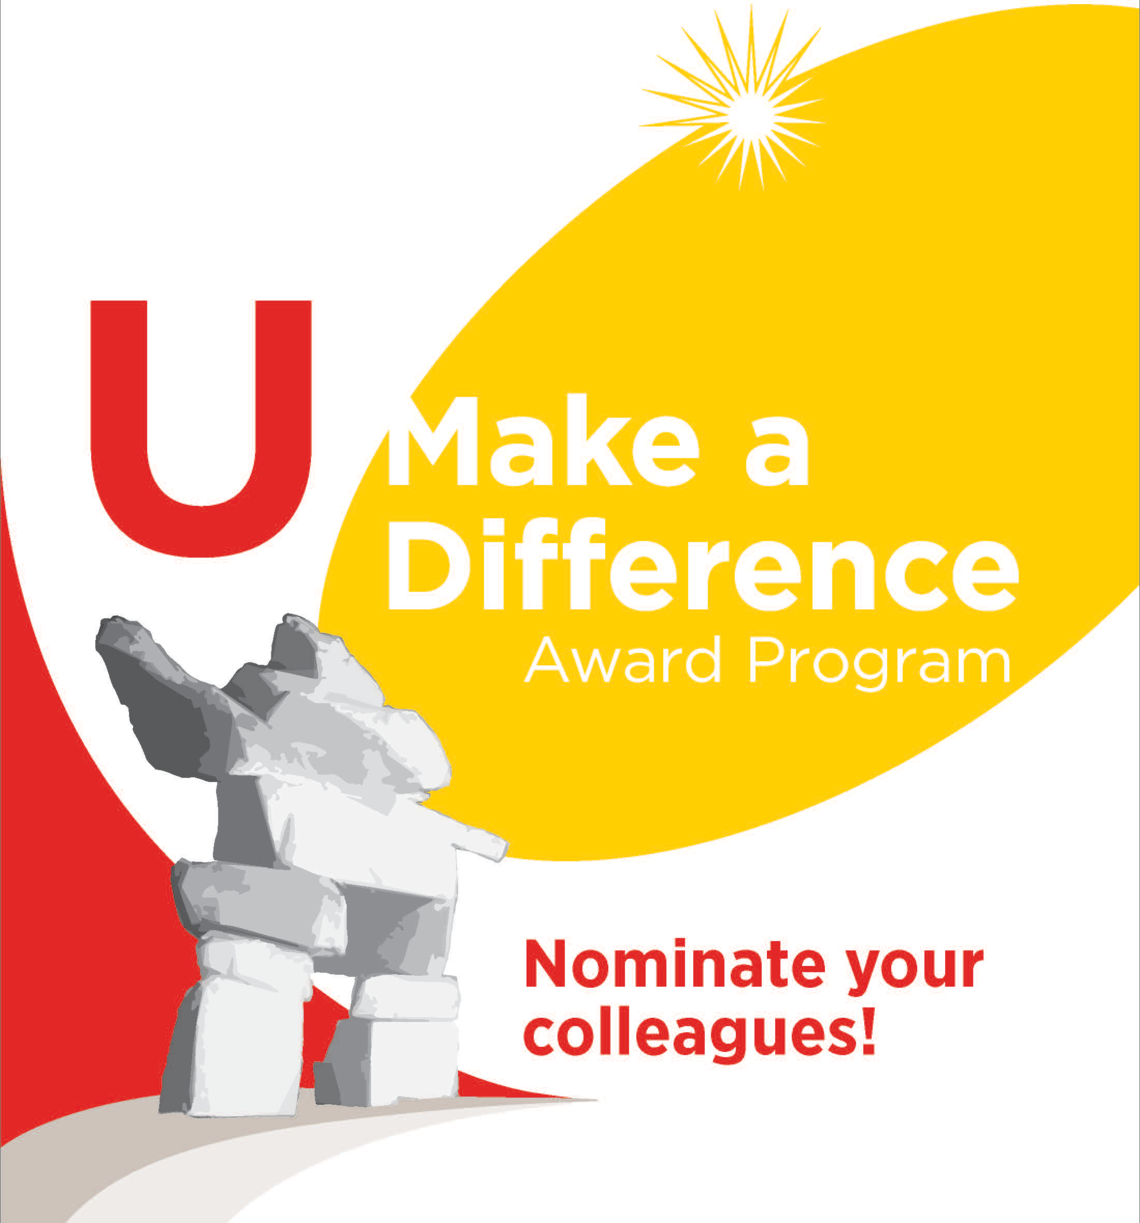 U Make a Difference awards recognize excellence in one of three key areas: innovation and curiosity, collaboration and communication, and a positive work environment and community.